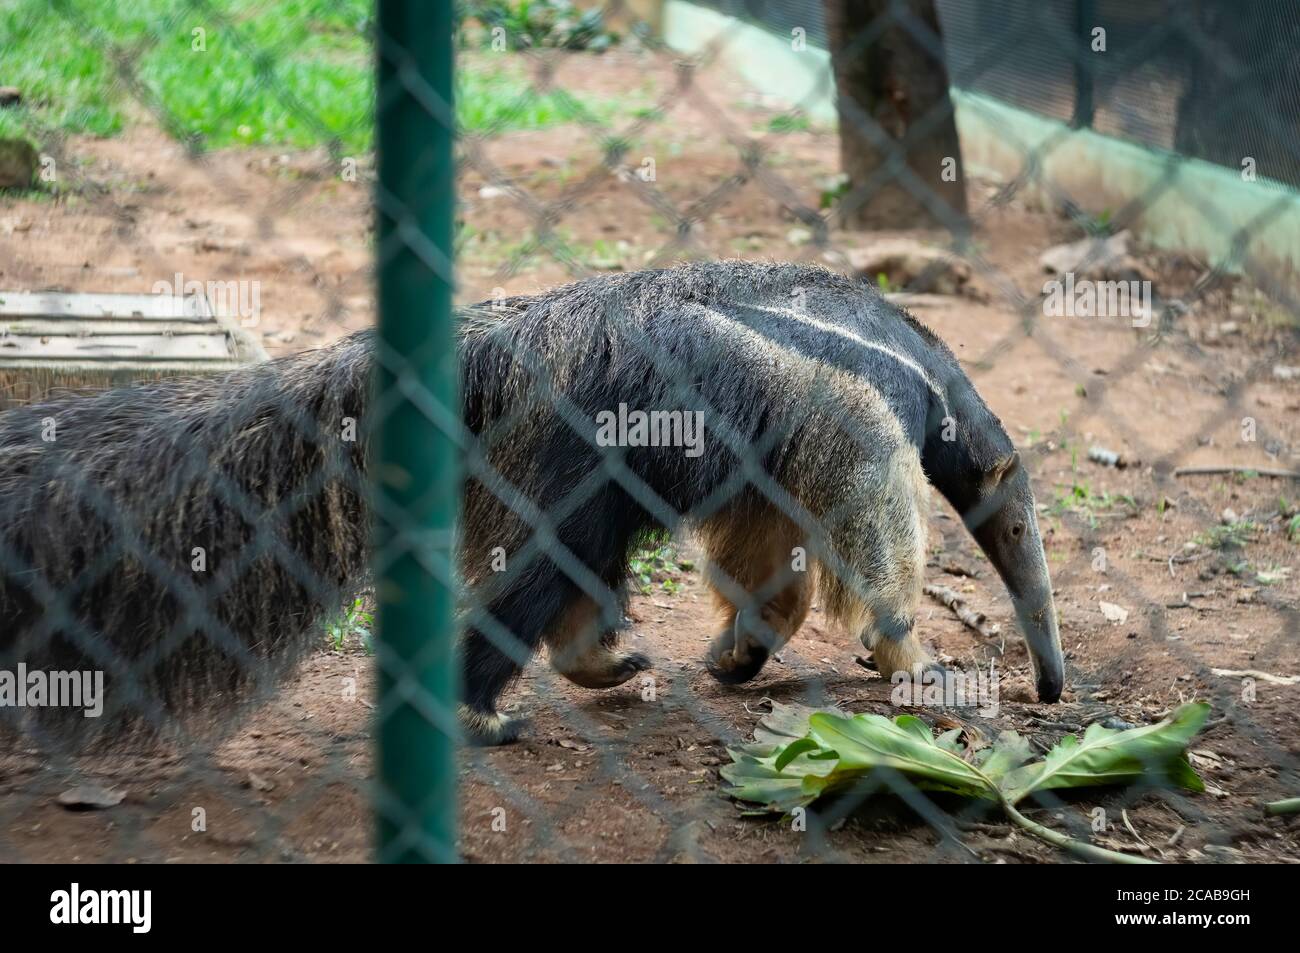 A Giant anteater (Myrmecophaga tridactyla - an insectivorous mammal) walking around inside his animal enclosure in Belo Horizonte zoological park. Stock Photo